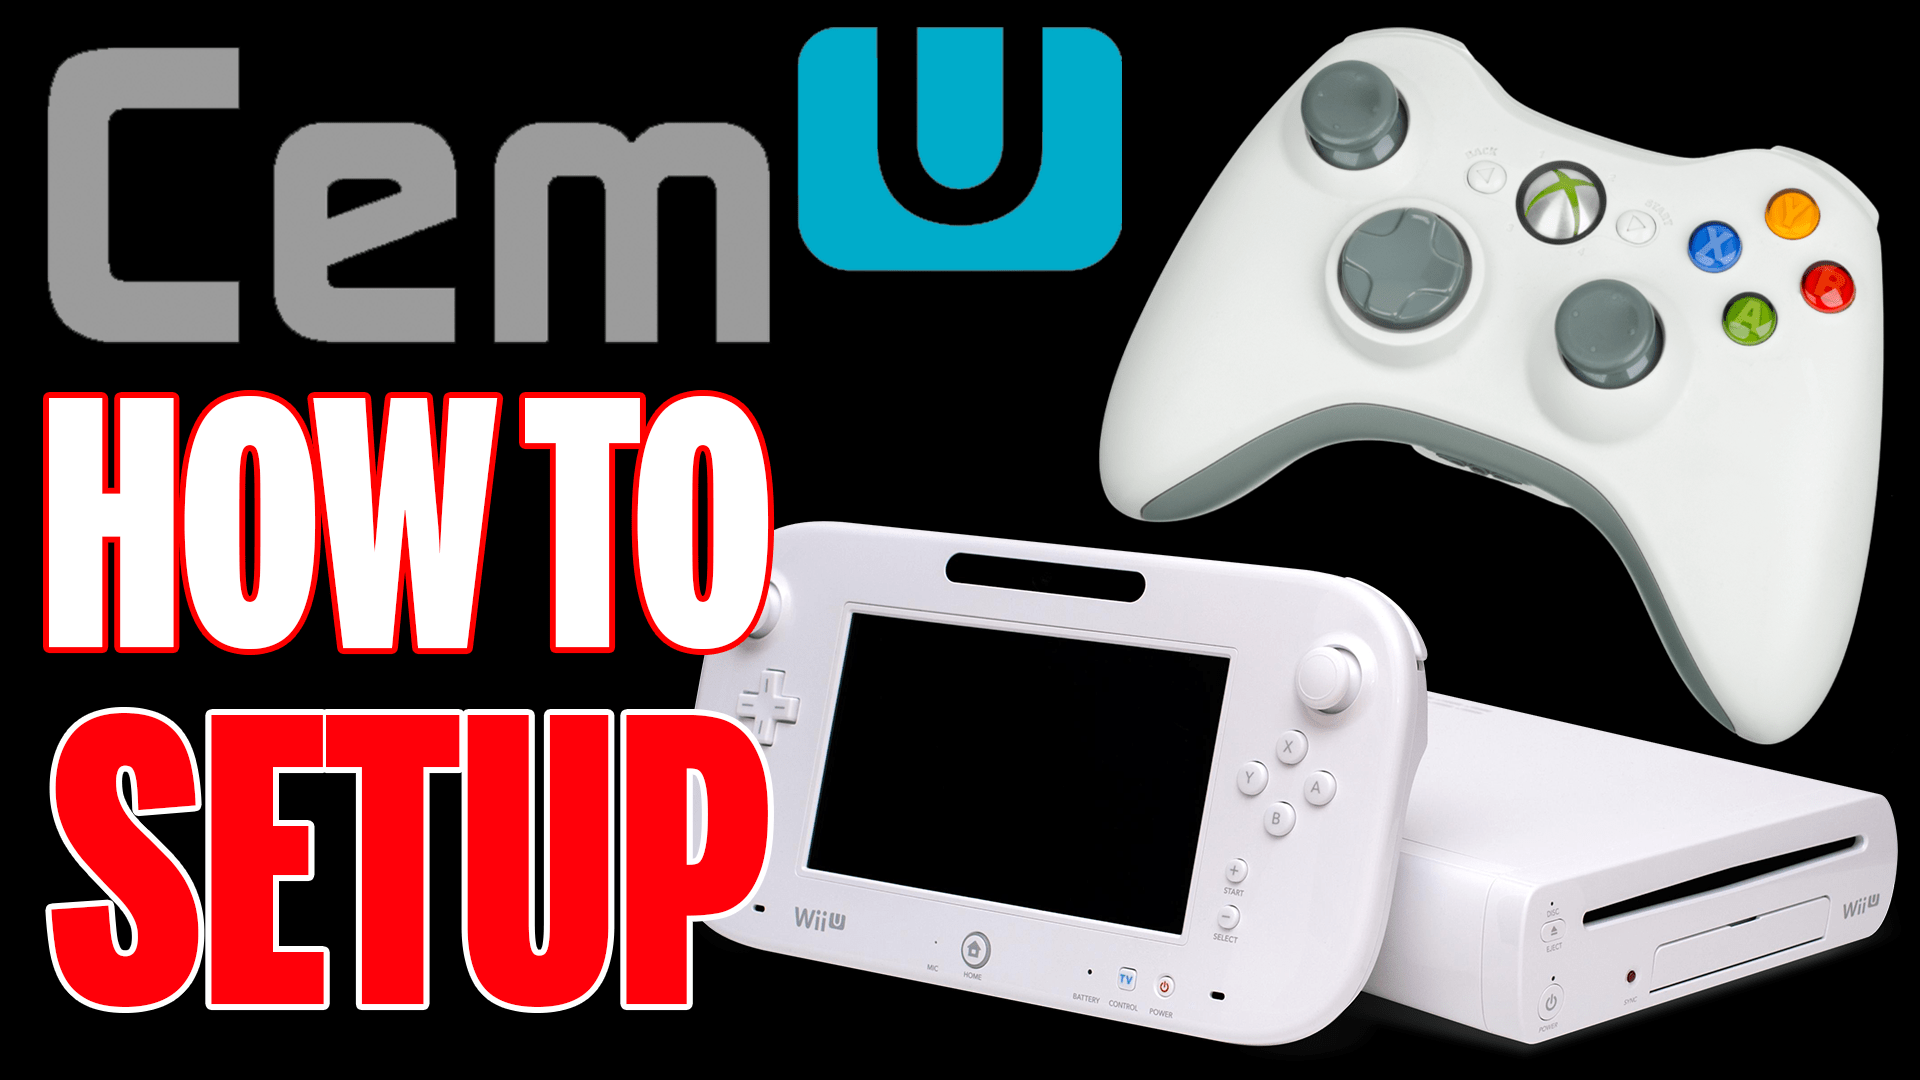 Setting up the Wii U emulator CEMU 1.6.2 with an Xbox 360 Controller